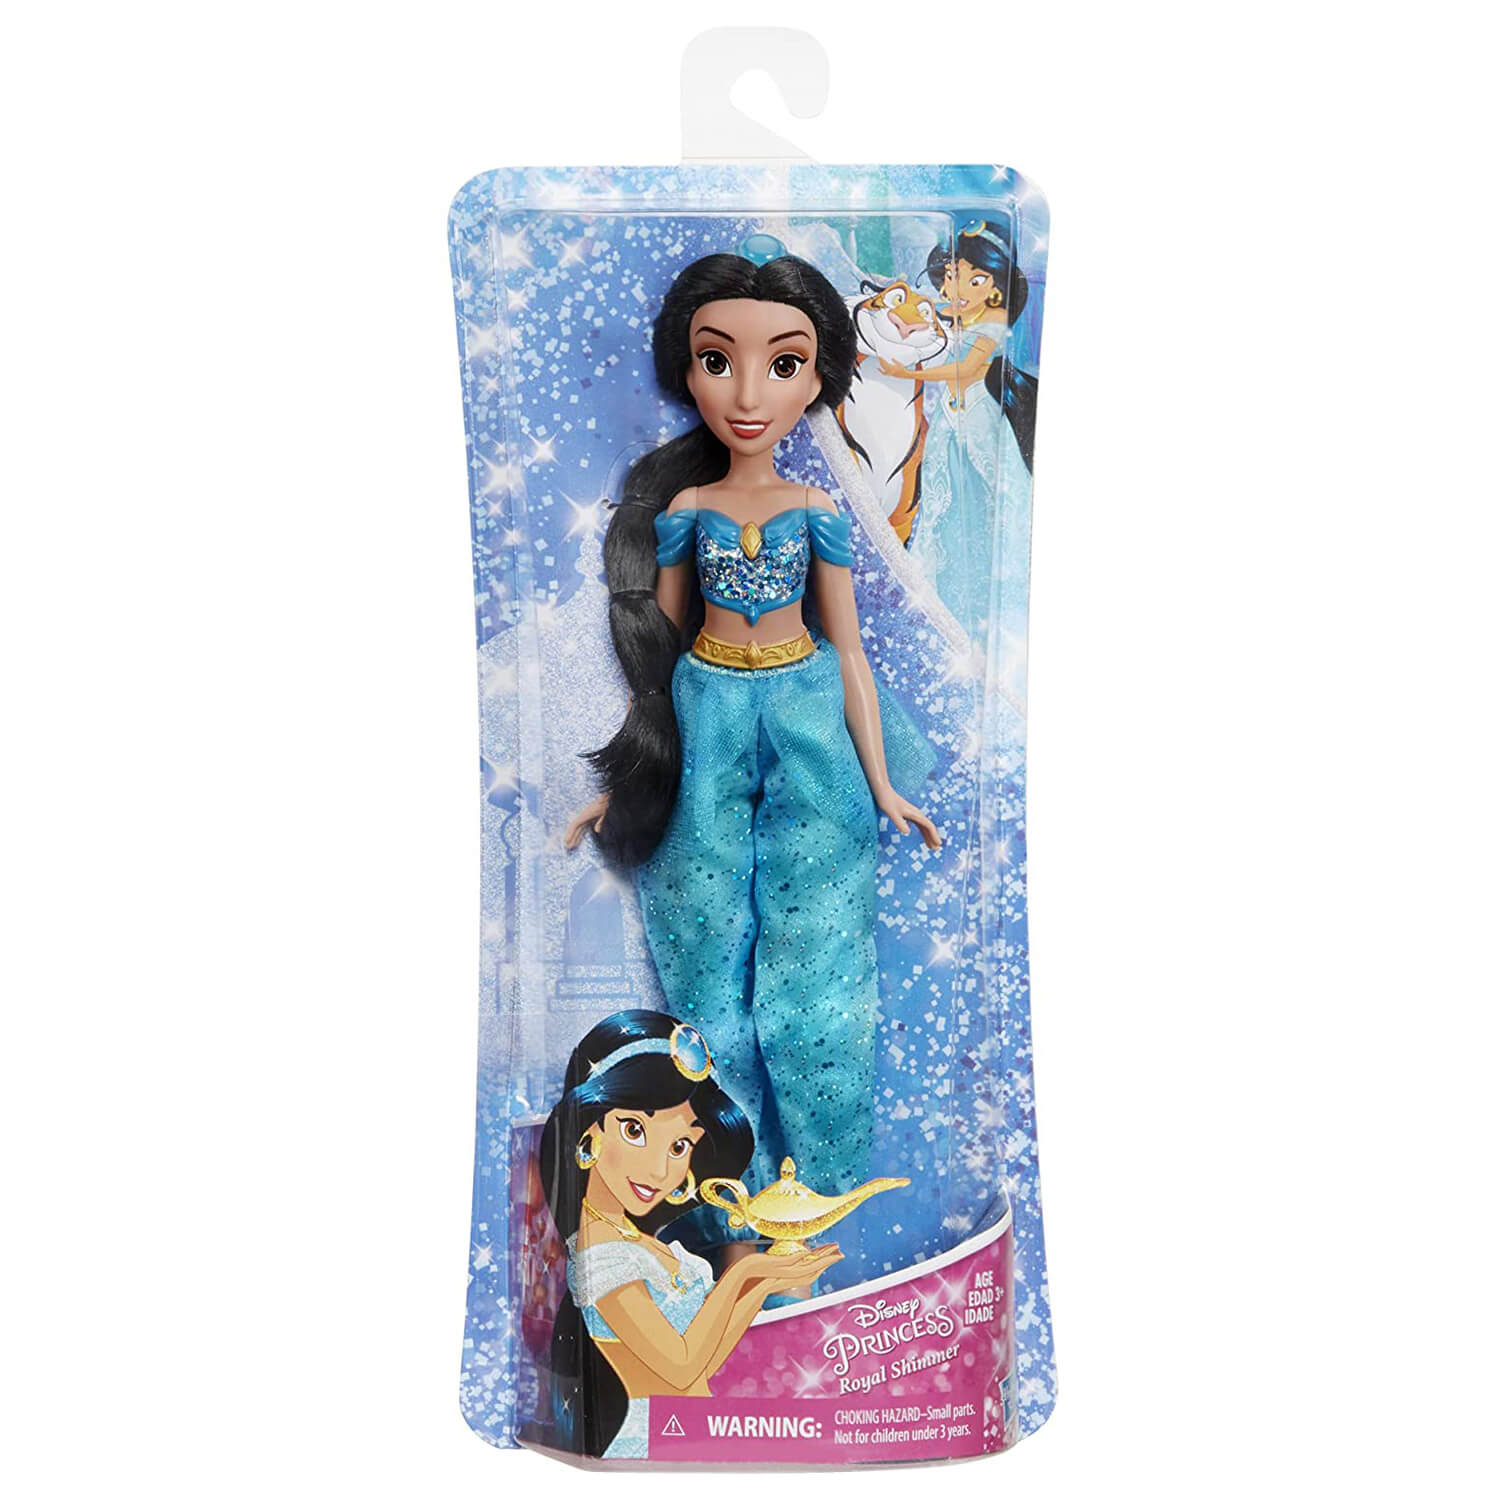 Front view of the Disney Princess Royal Shimmer Jasmine Doll package.